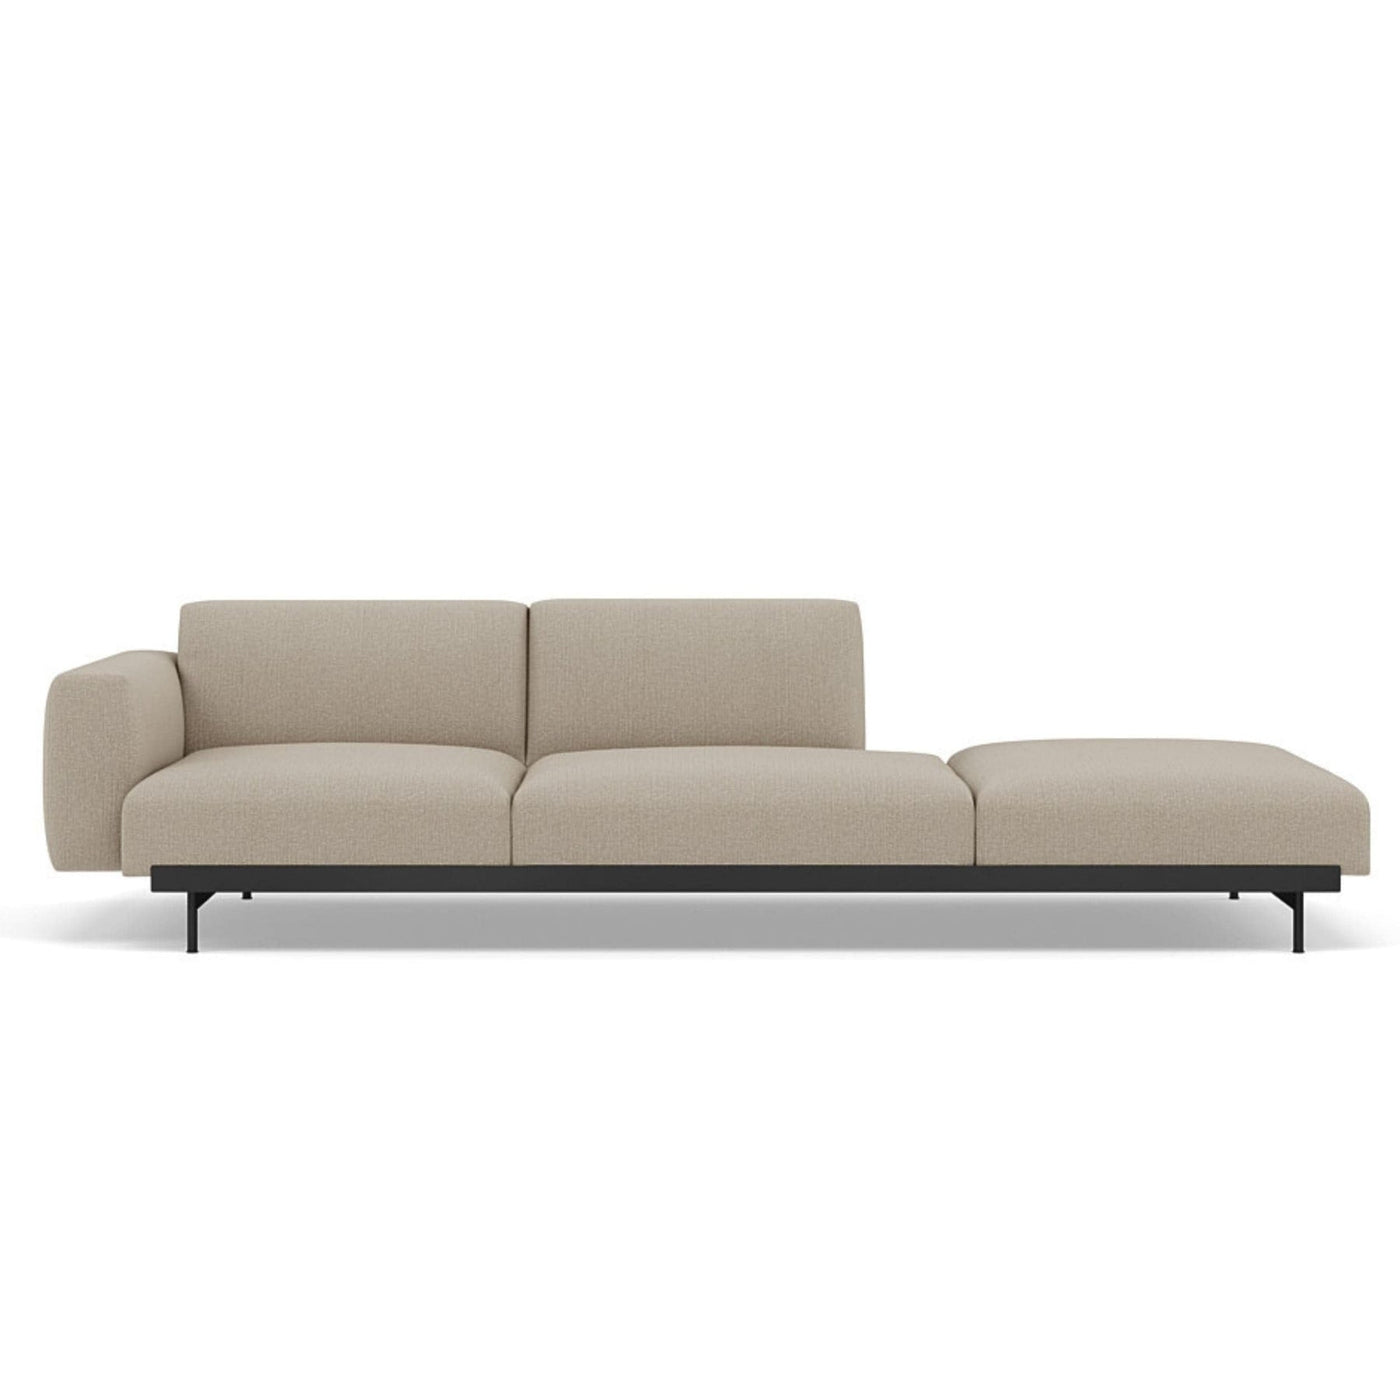 Muuto In Situ Modular 3 Seater Sofa, configuration 5. Made to order from someday designs. #colour_clay-10